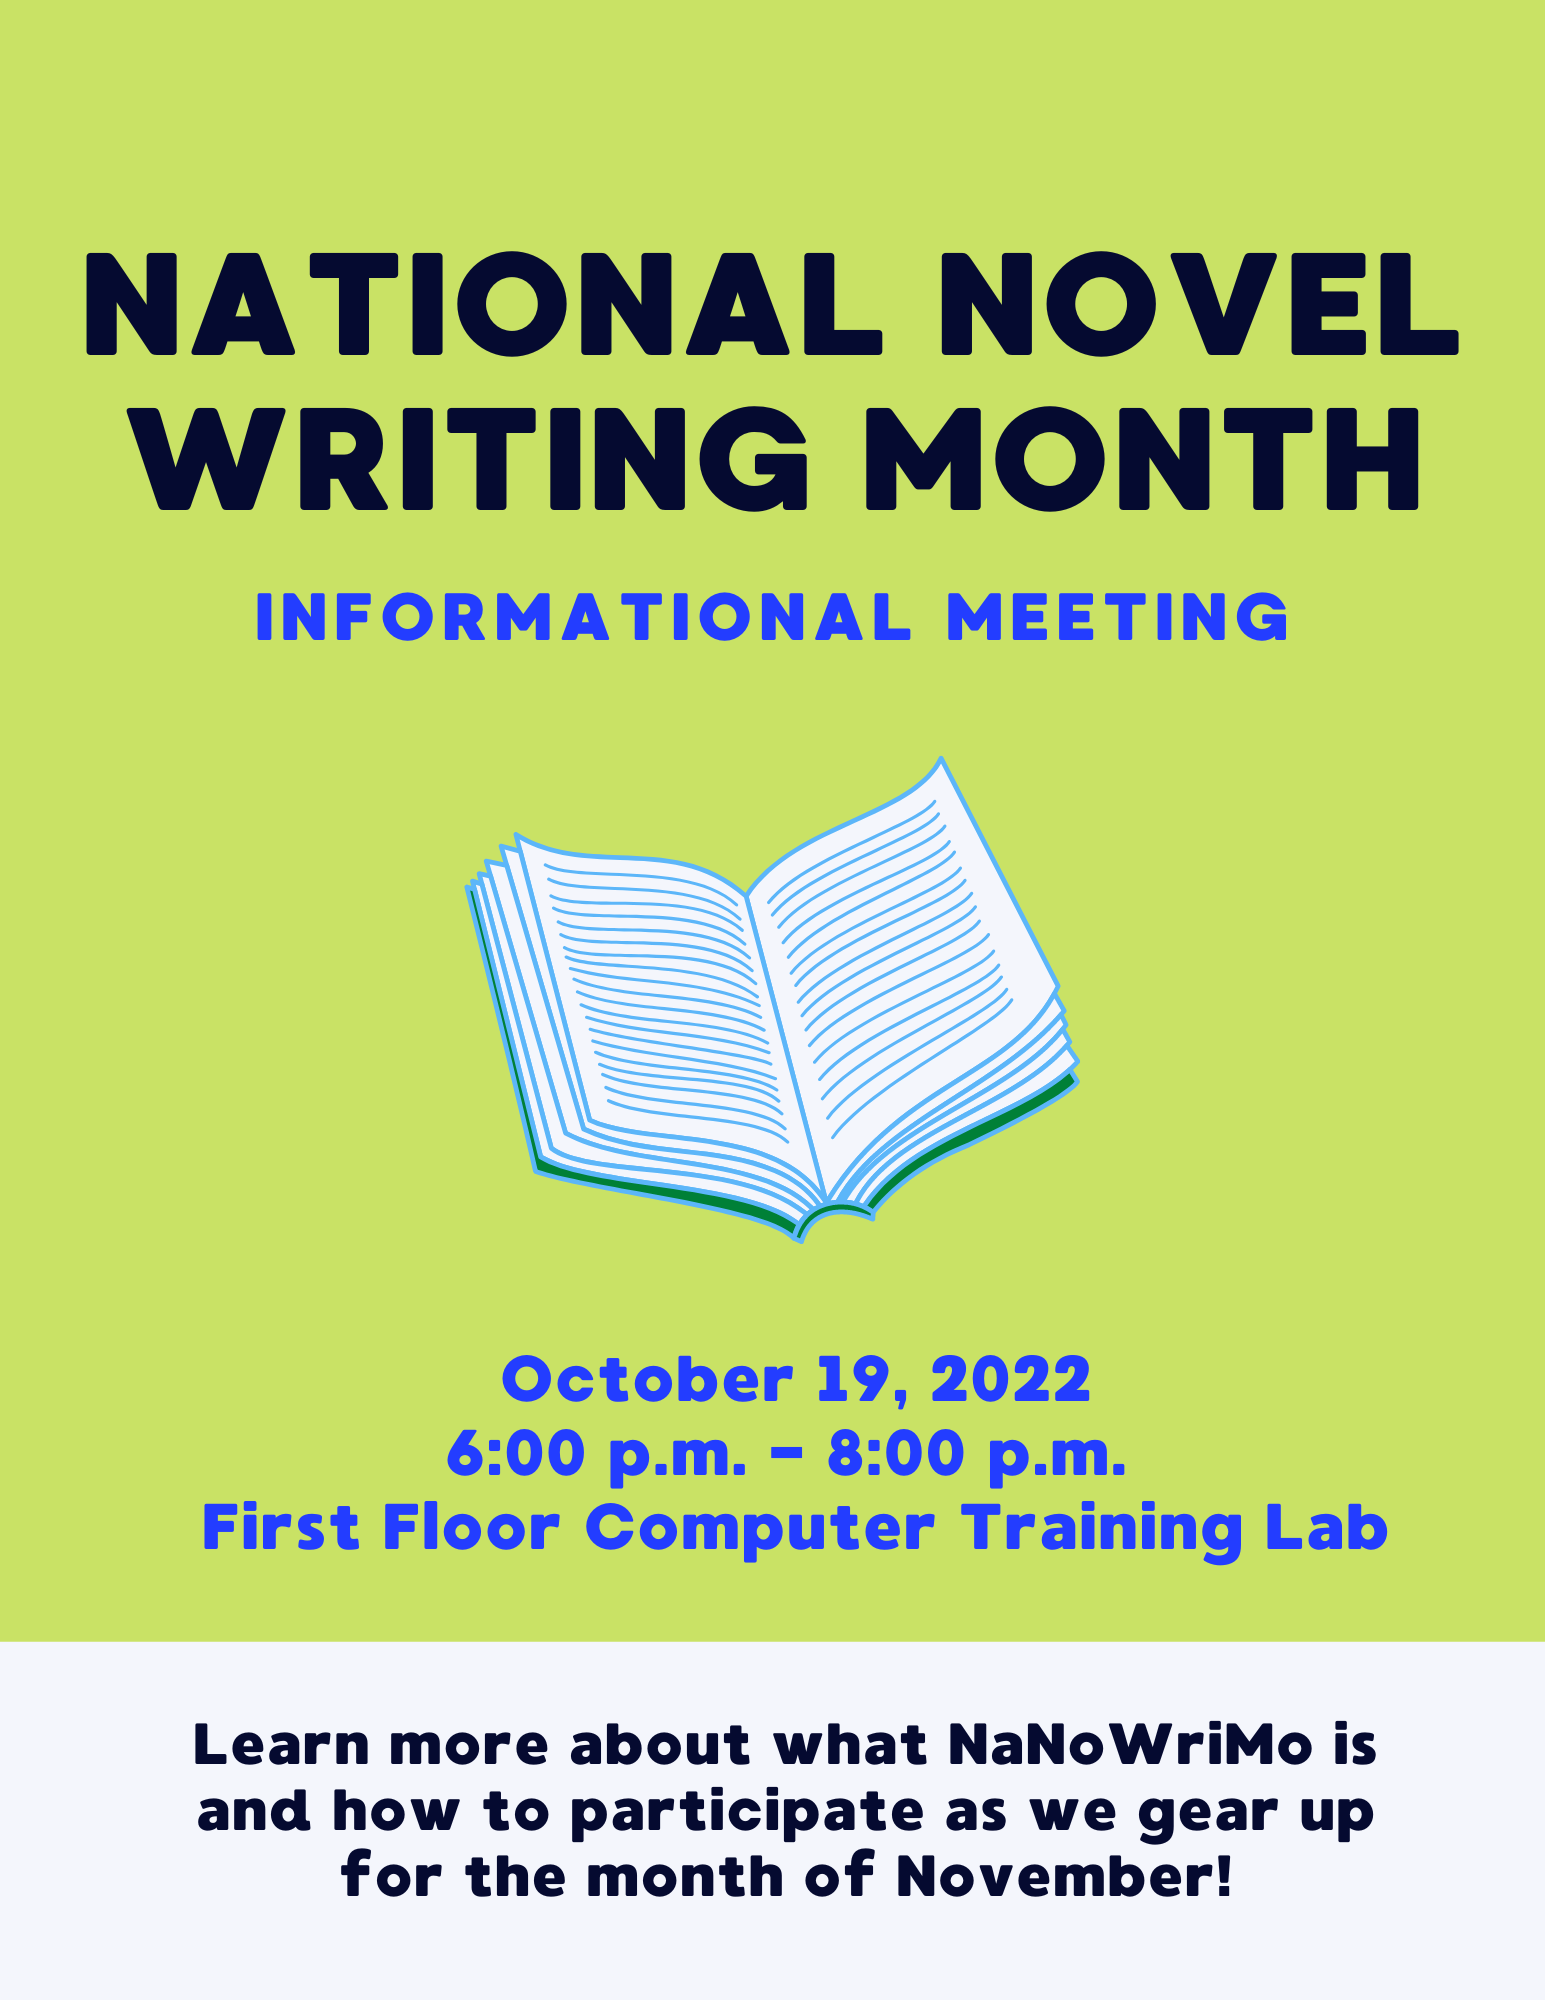 National Novel Writing Month Informational Meeting: October 19th, 2022 from 6:00 p.m. - 8:00 p.m. 